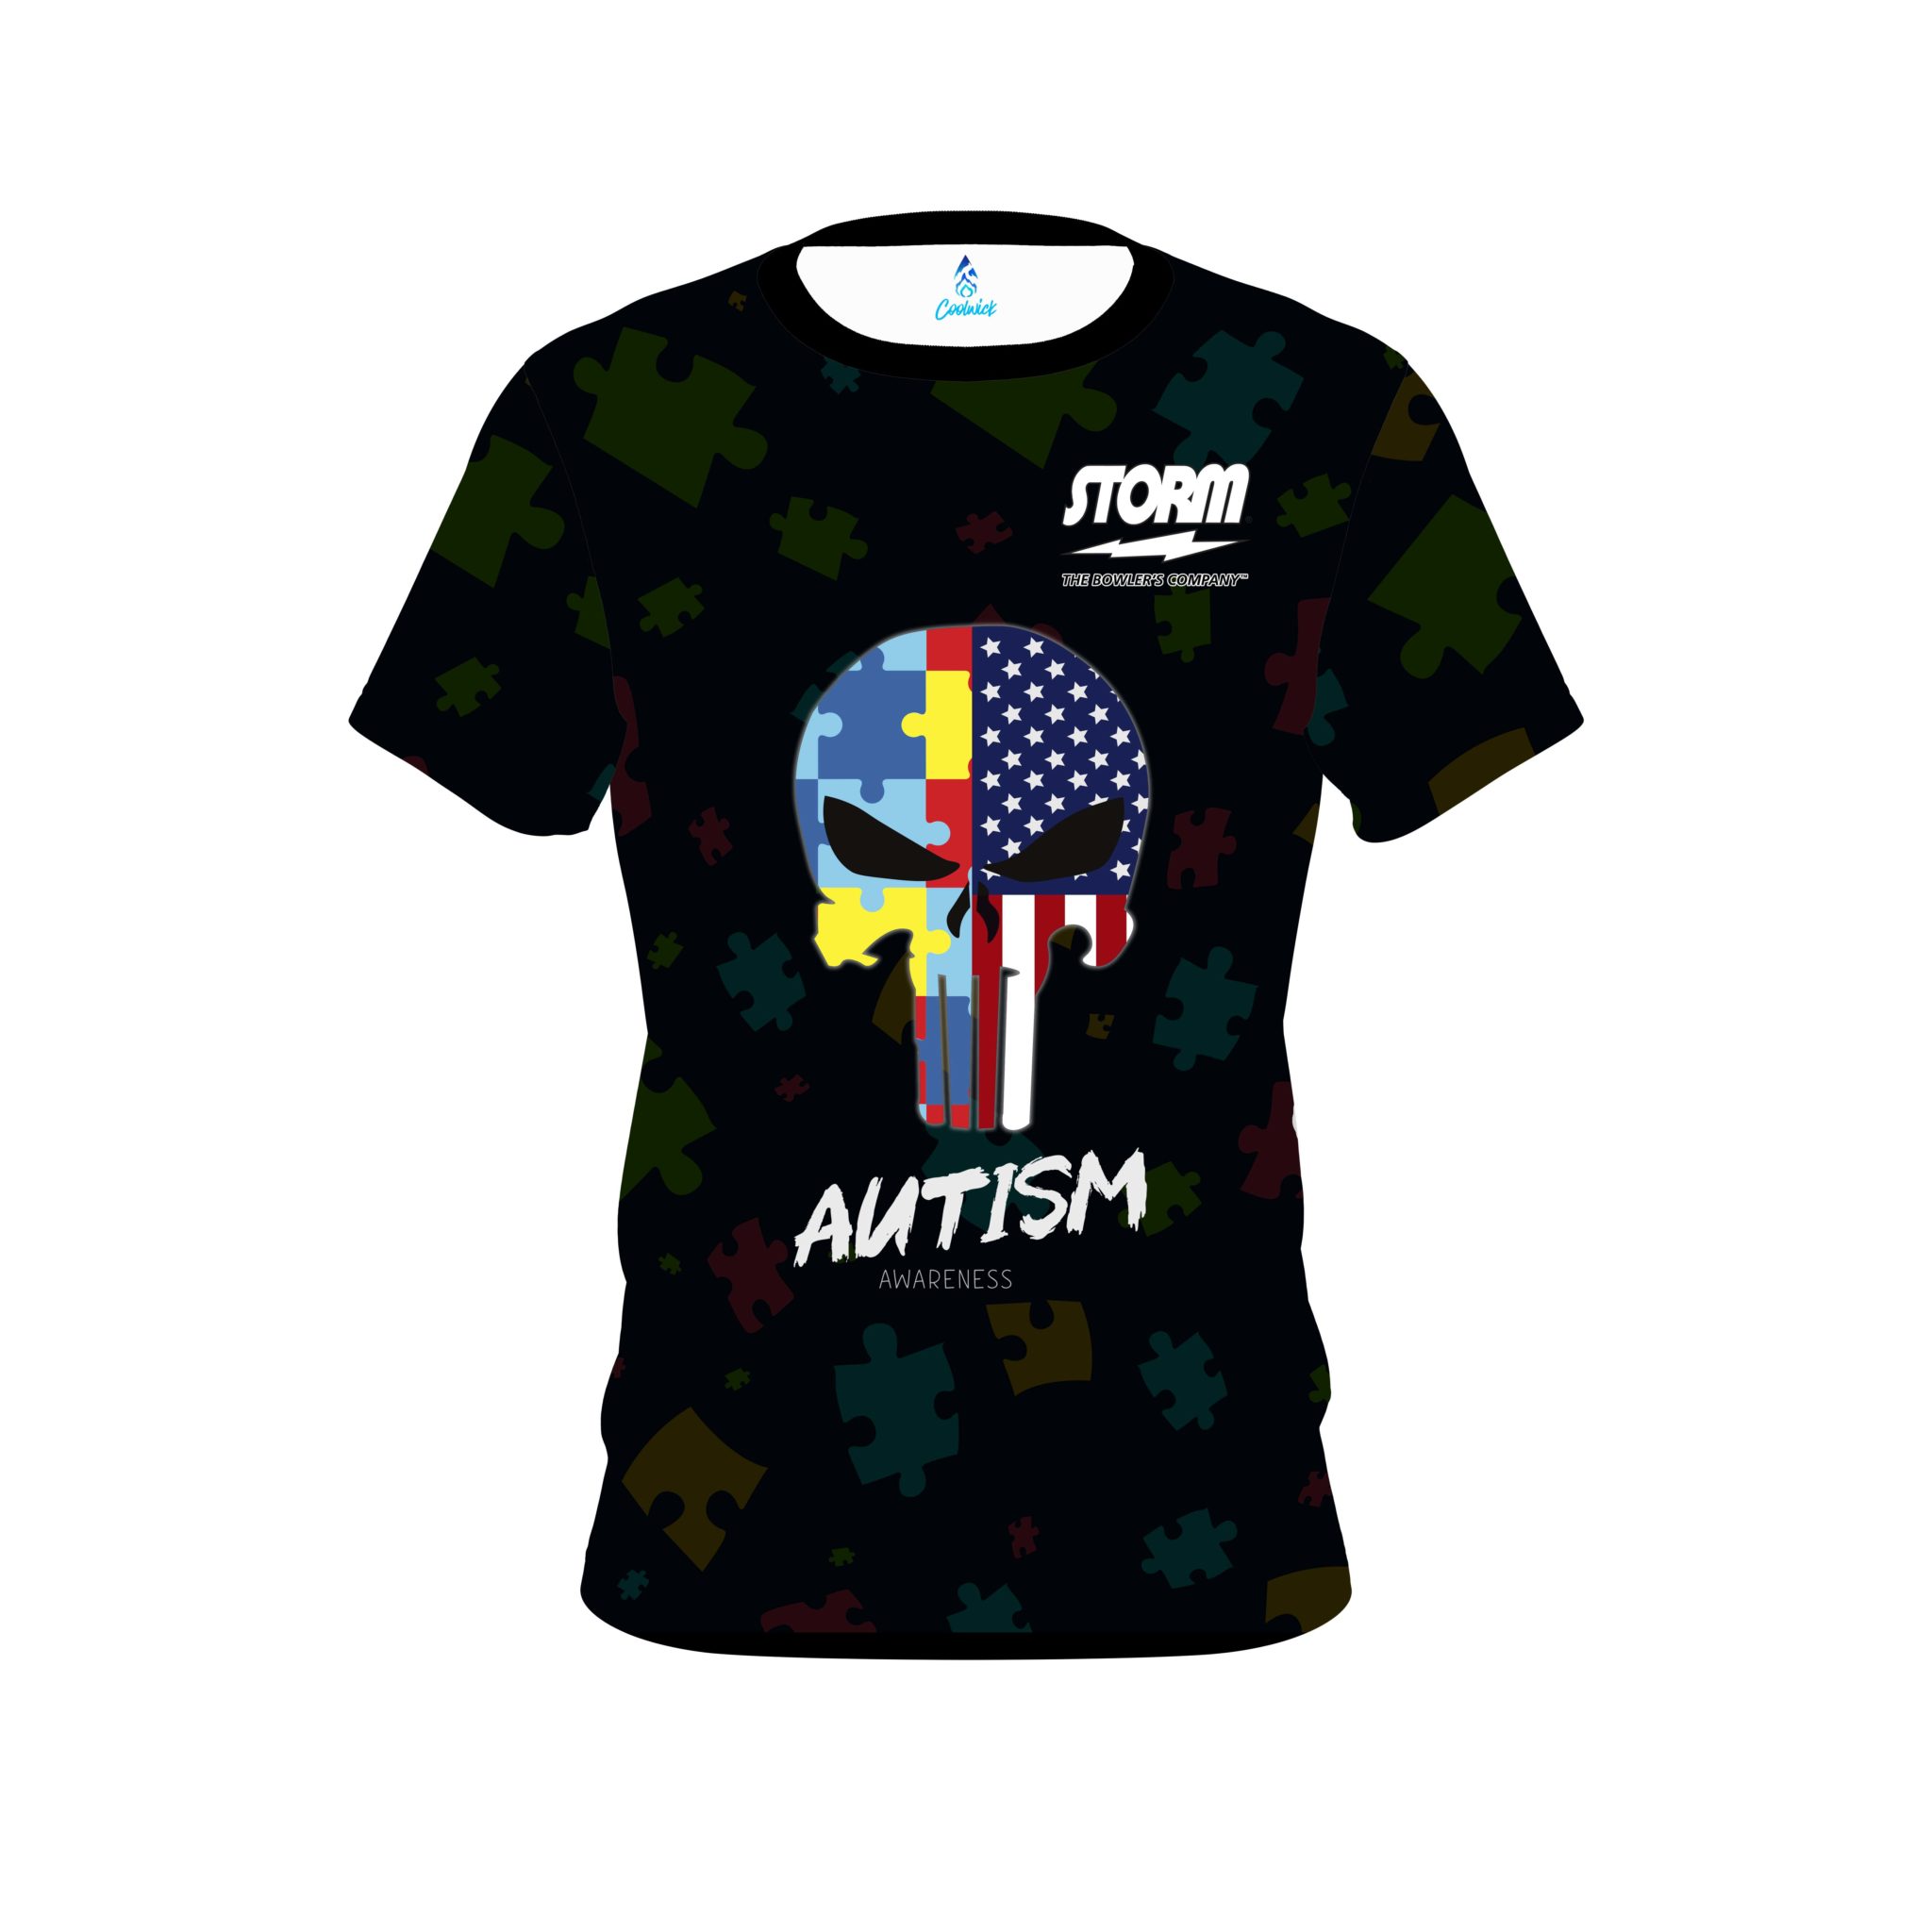 Storm Autism Punisher CoolWick Bowling Jersey